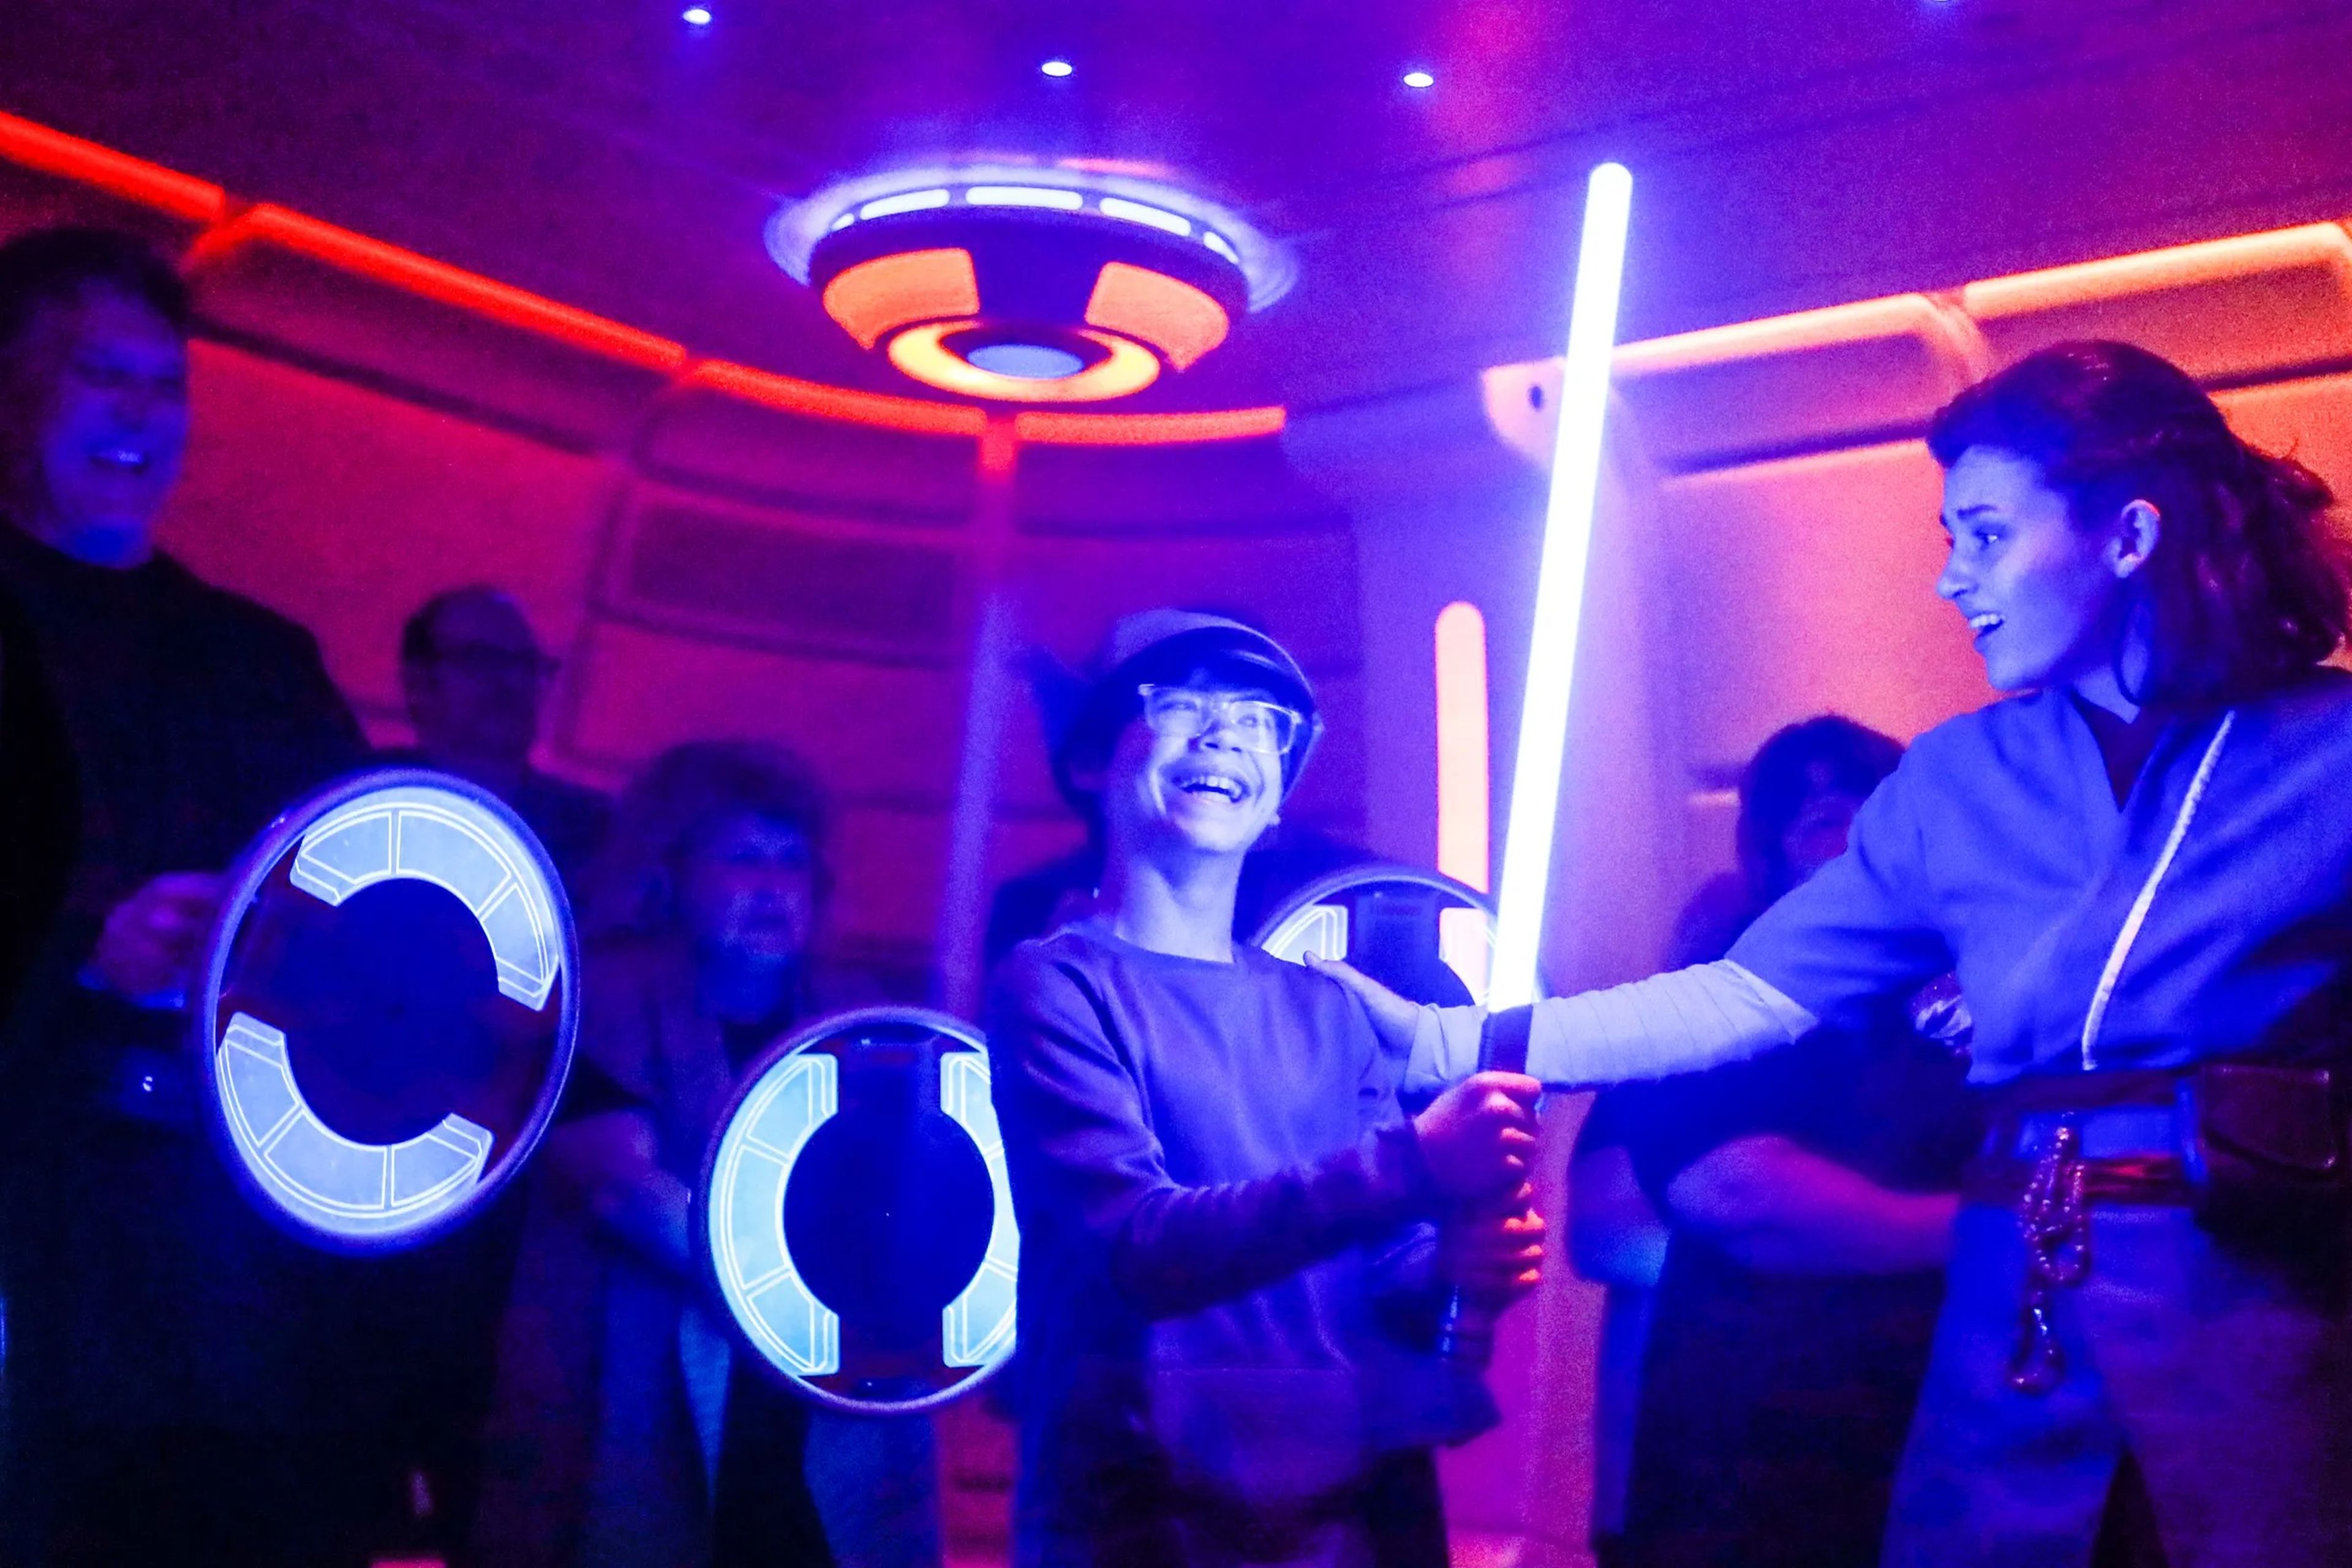 A child holds a lightsaber at the Star Wars: Galactic Starcruiser hotel